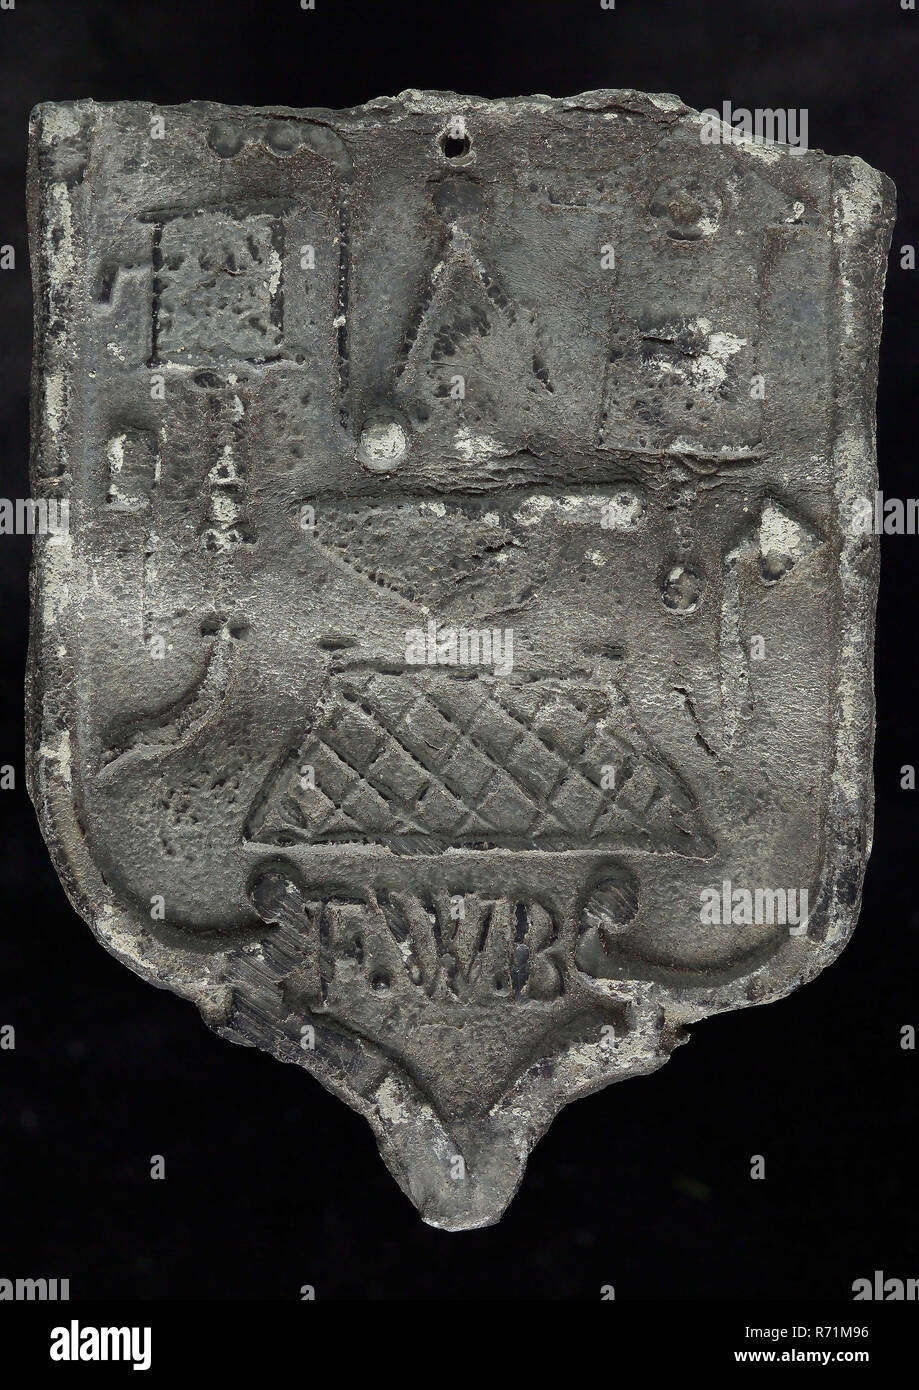 FWB, Roof blank, shield-shaped cover plate with initials FWB and guide tool, plummet lead metal, Roof lead shield-shaped cover of the nails with embossed various guide tools and the initials of the plumber F.W.. on picture: F.W.. leader Stock Photo